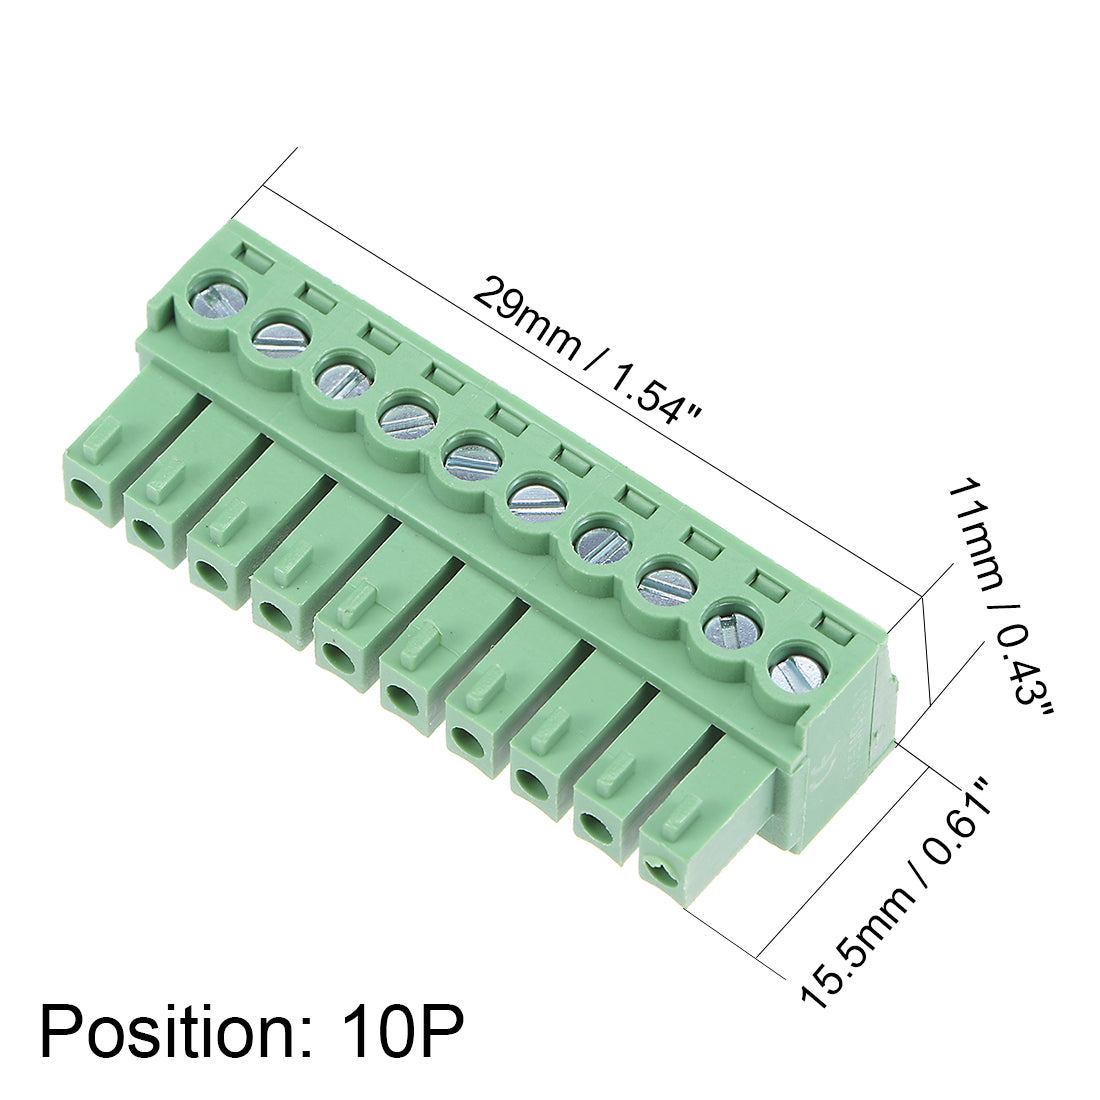 uxcell Uxcell 10Pcs AC300V 10A 3.81mm Pitch 10P Needle Seat Insert-In PCB Terminal Block green